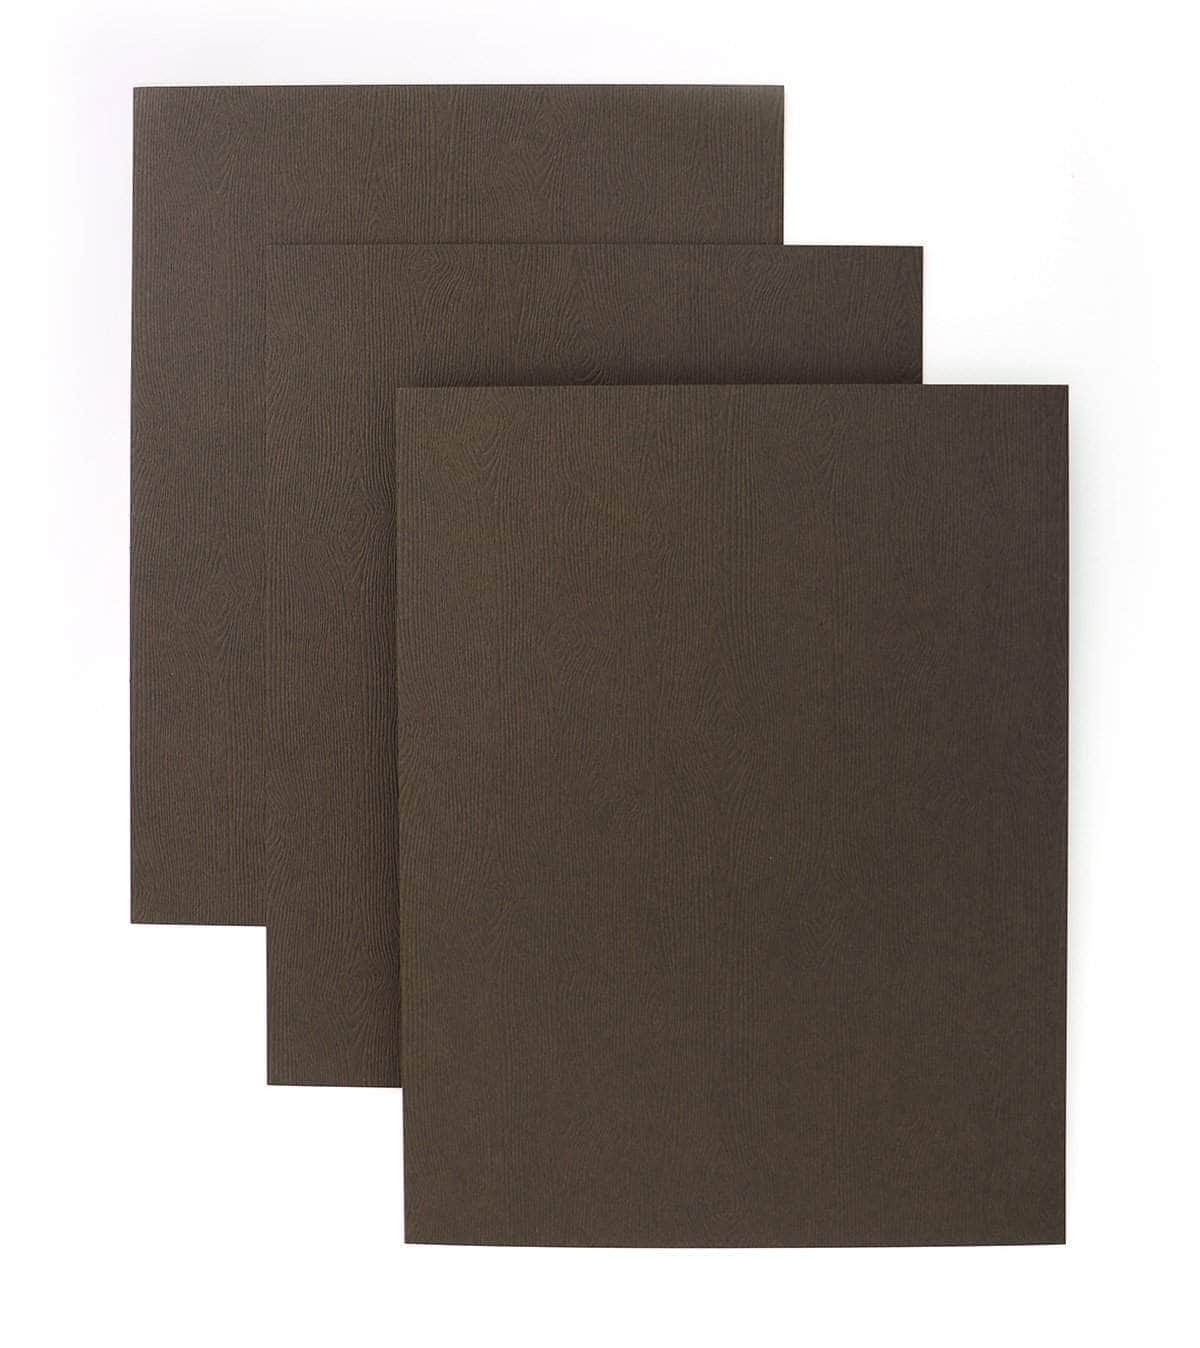 Brown Craft Paper A4 Kraft Paper 350gsm Thick Cardstock Paper